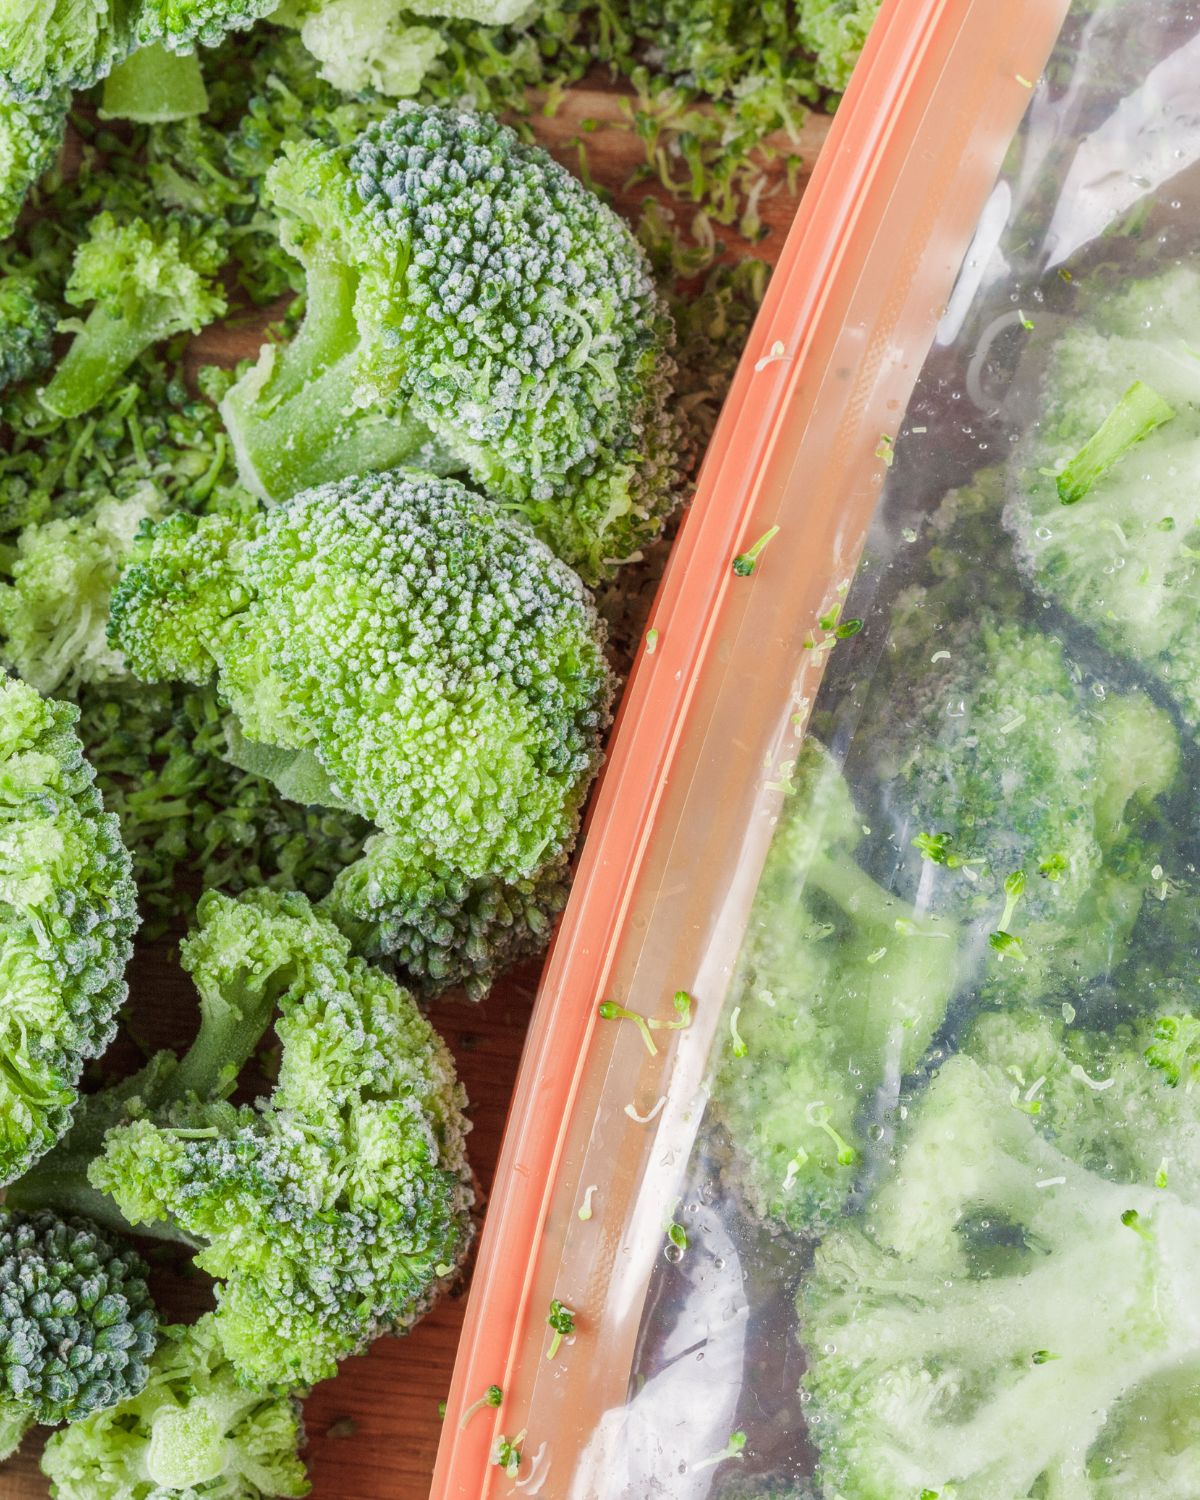 Storing the broccoli in a freezer bag.